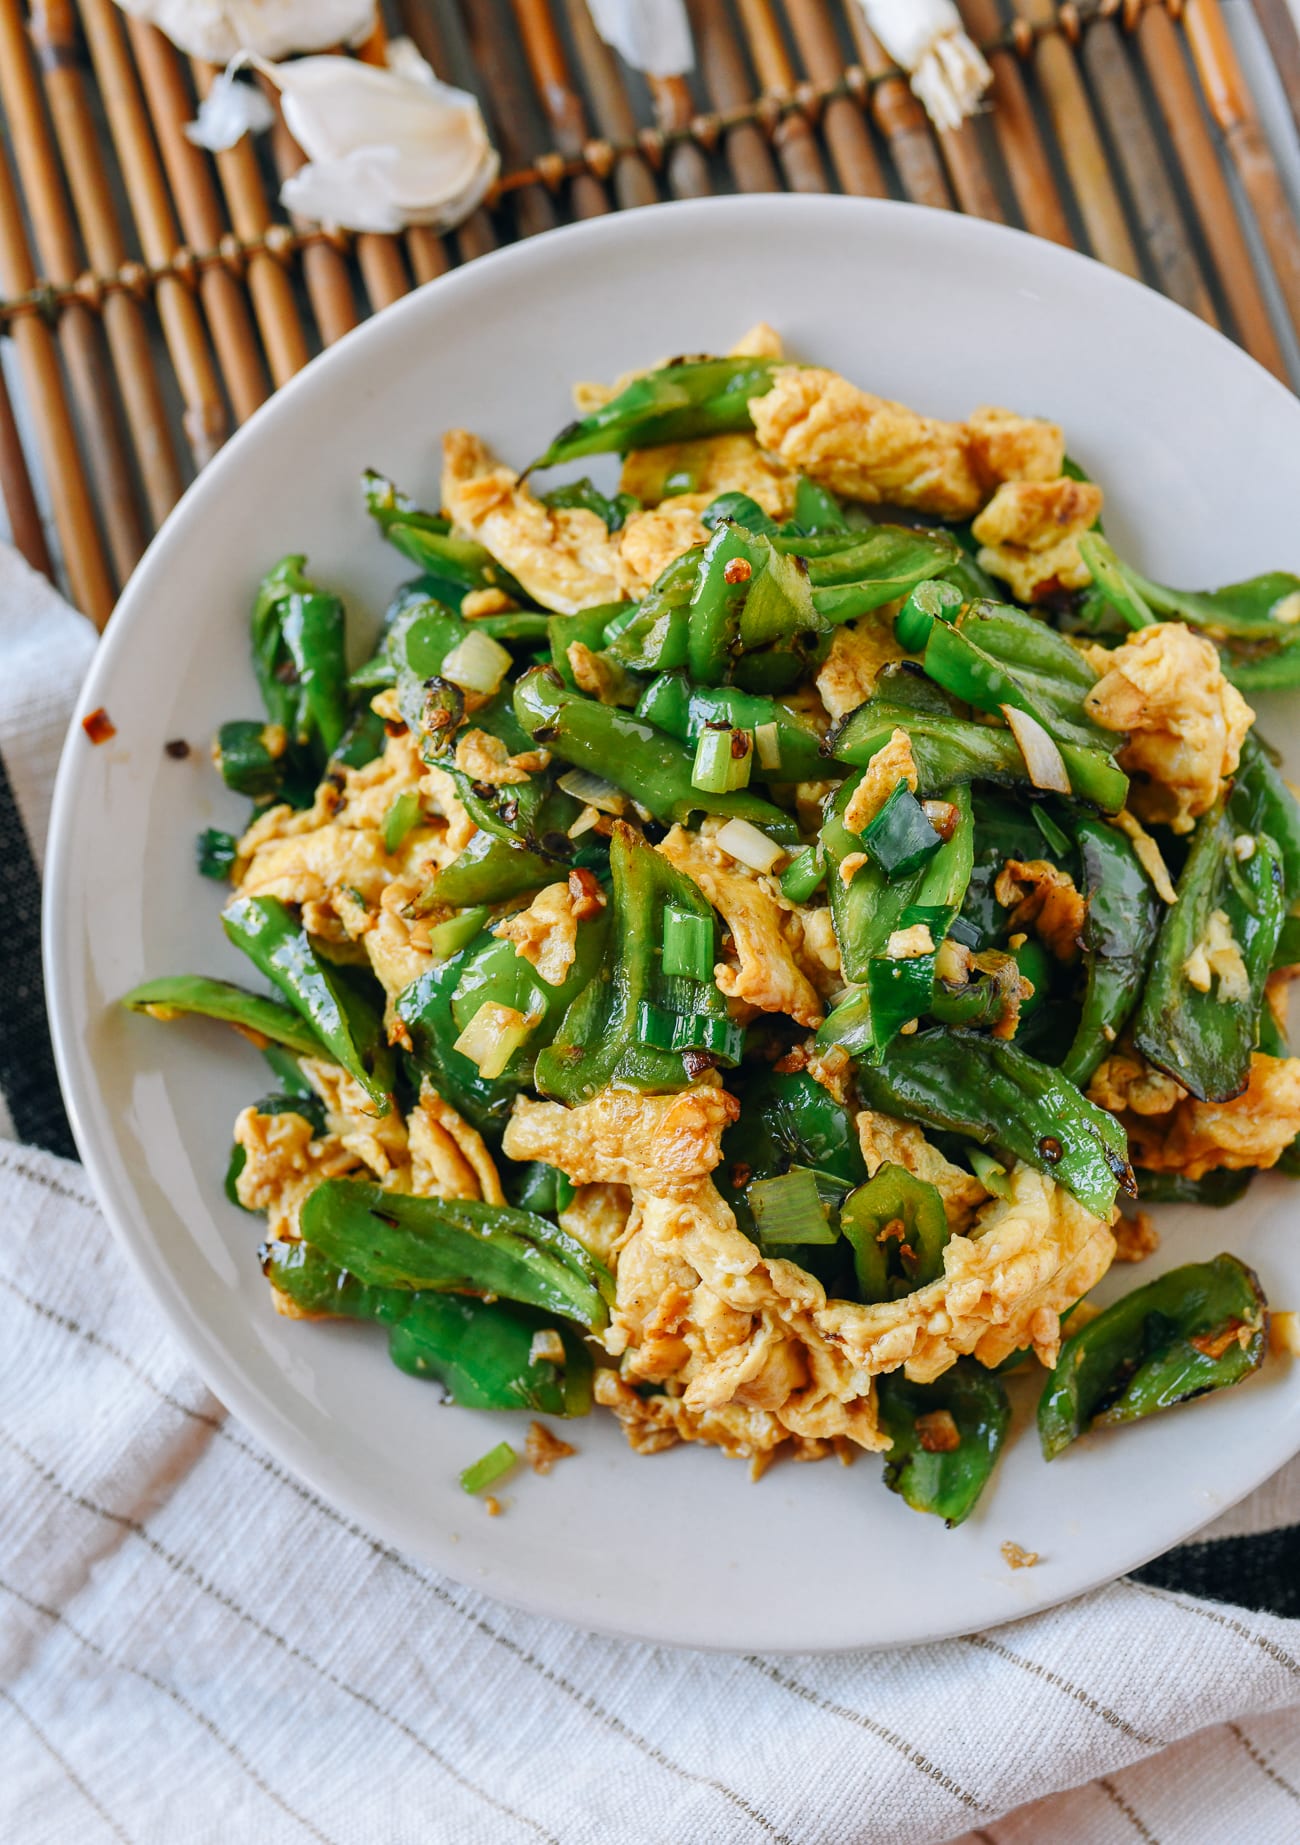 Quick Egg Stir-Fry with Peppers - The Woks of Life